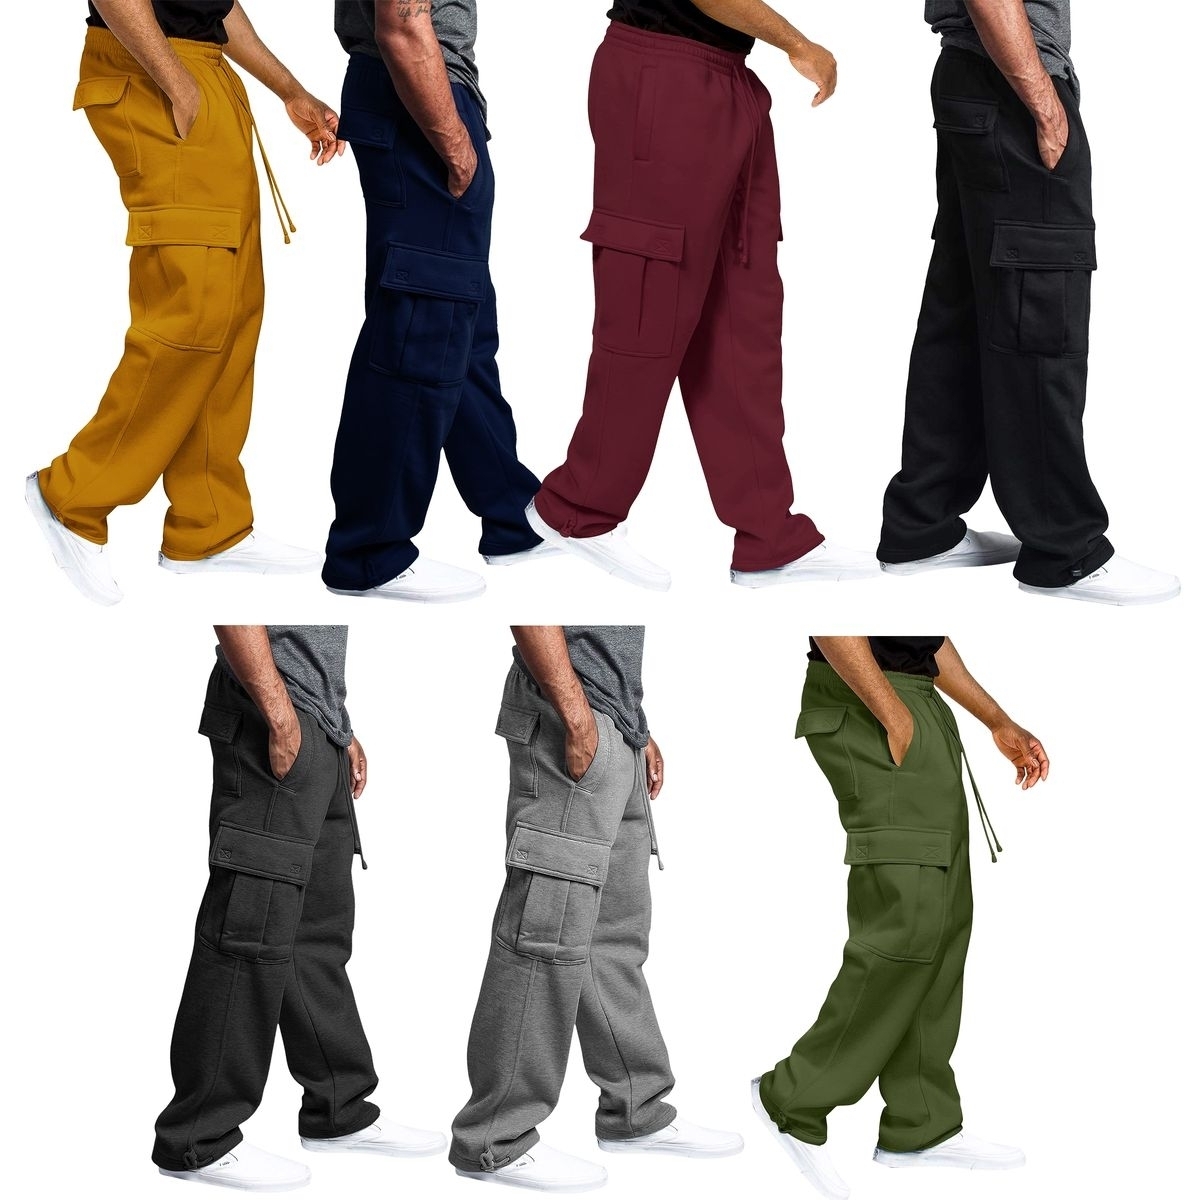 3-Pack: Men's Casual Solid Fleece Lined Cargo Jogger Sweatpants With Pockets - Medium